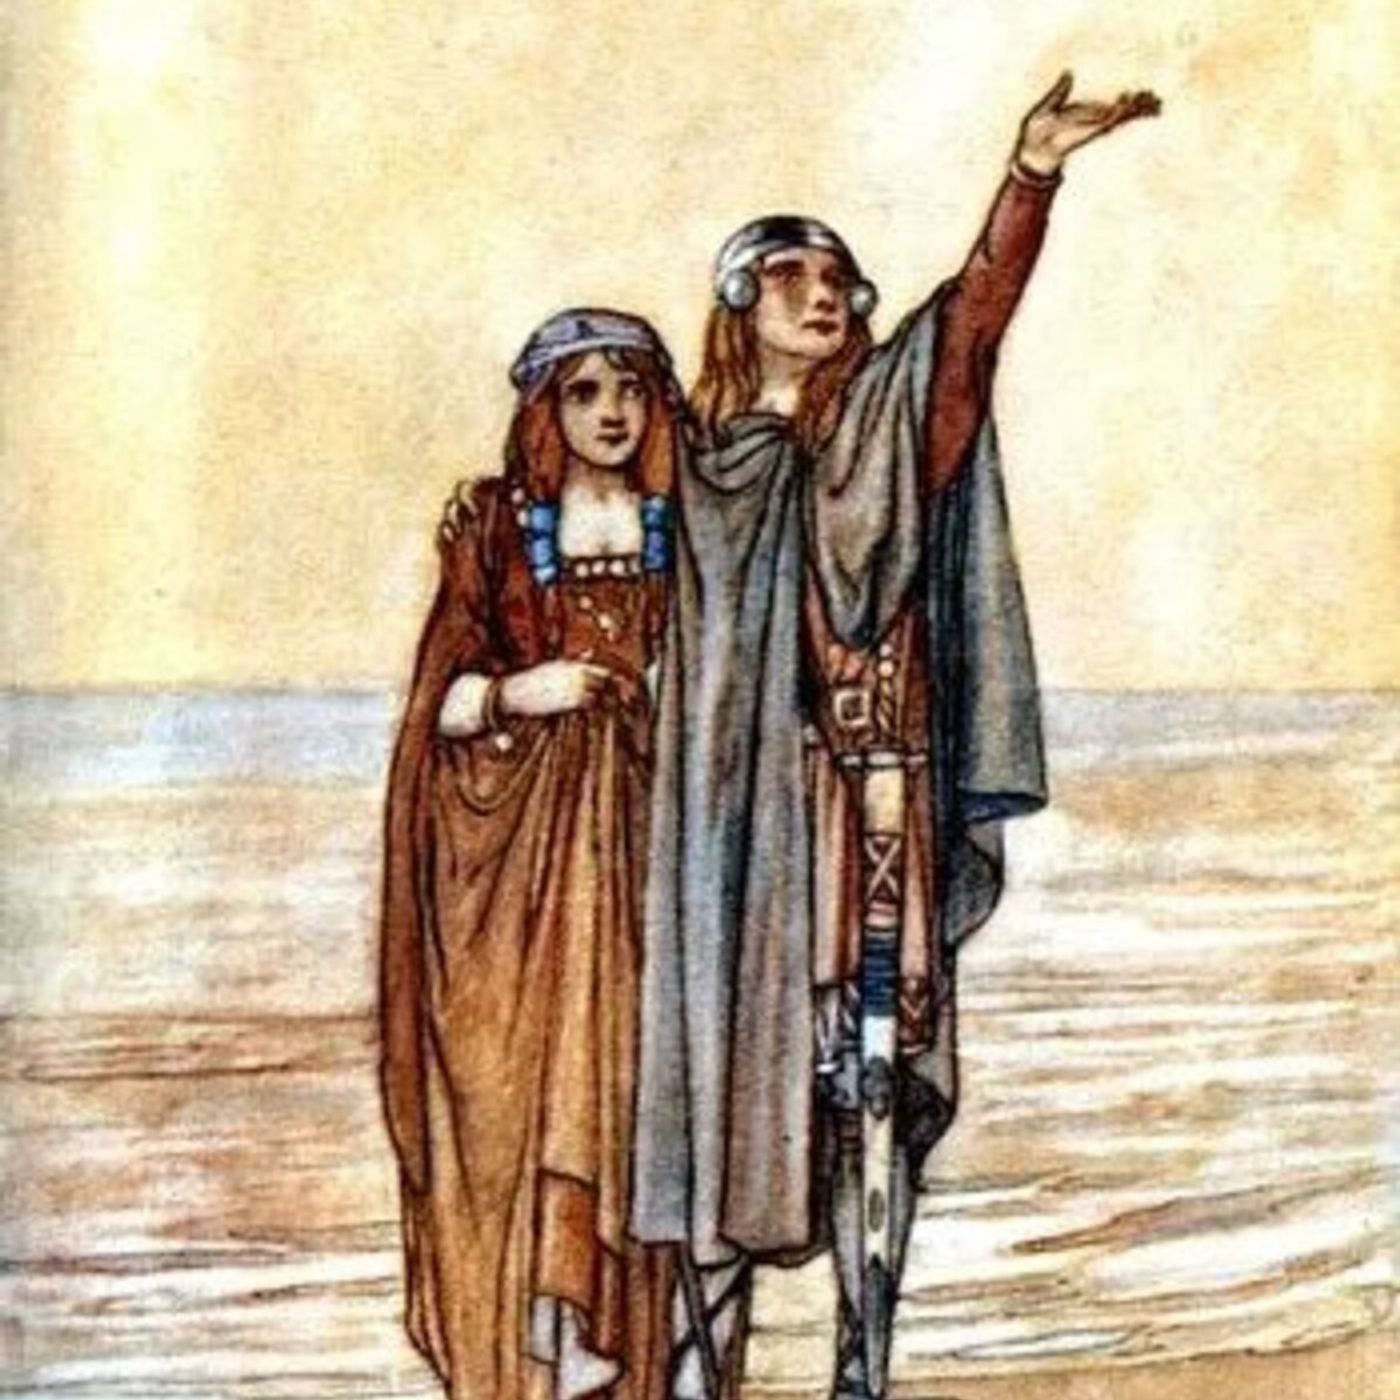 The Wooing of Étaín (Part 2)